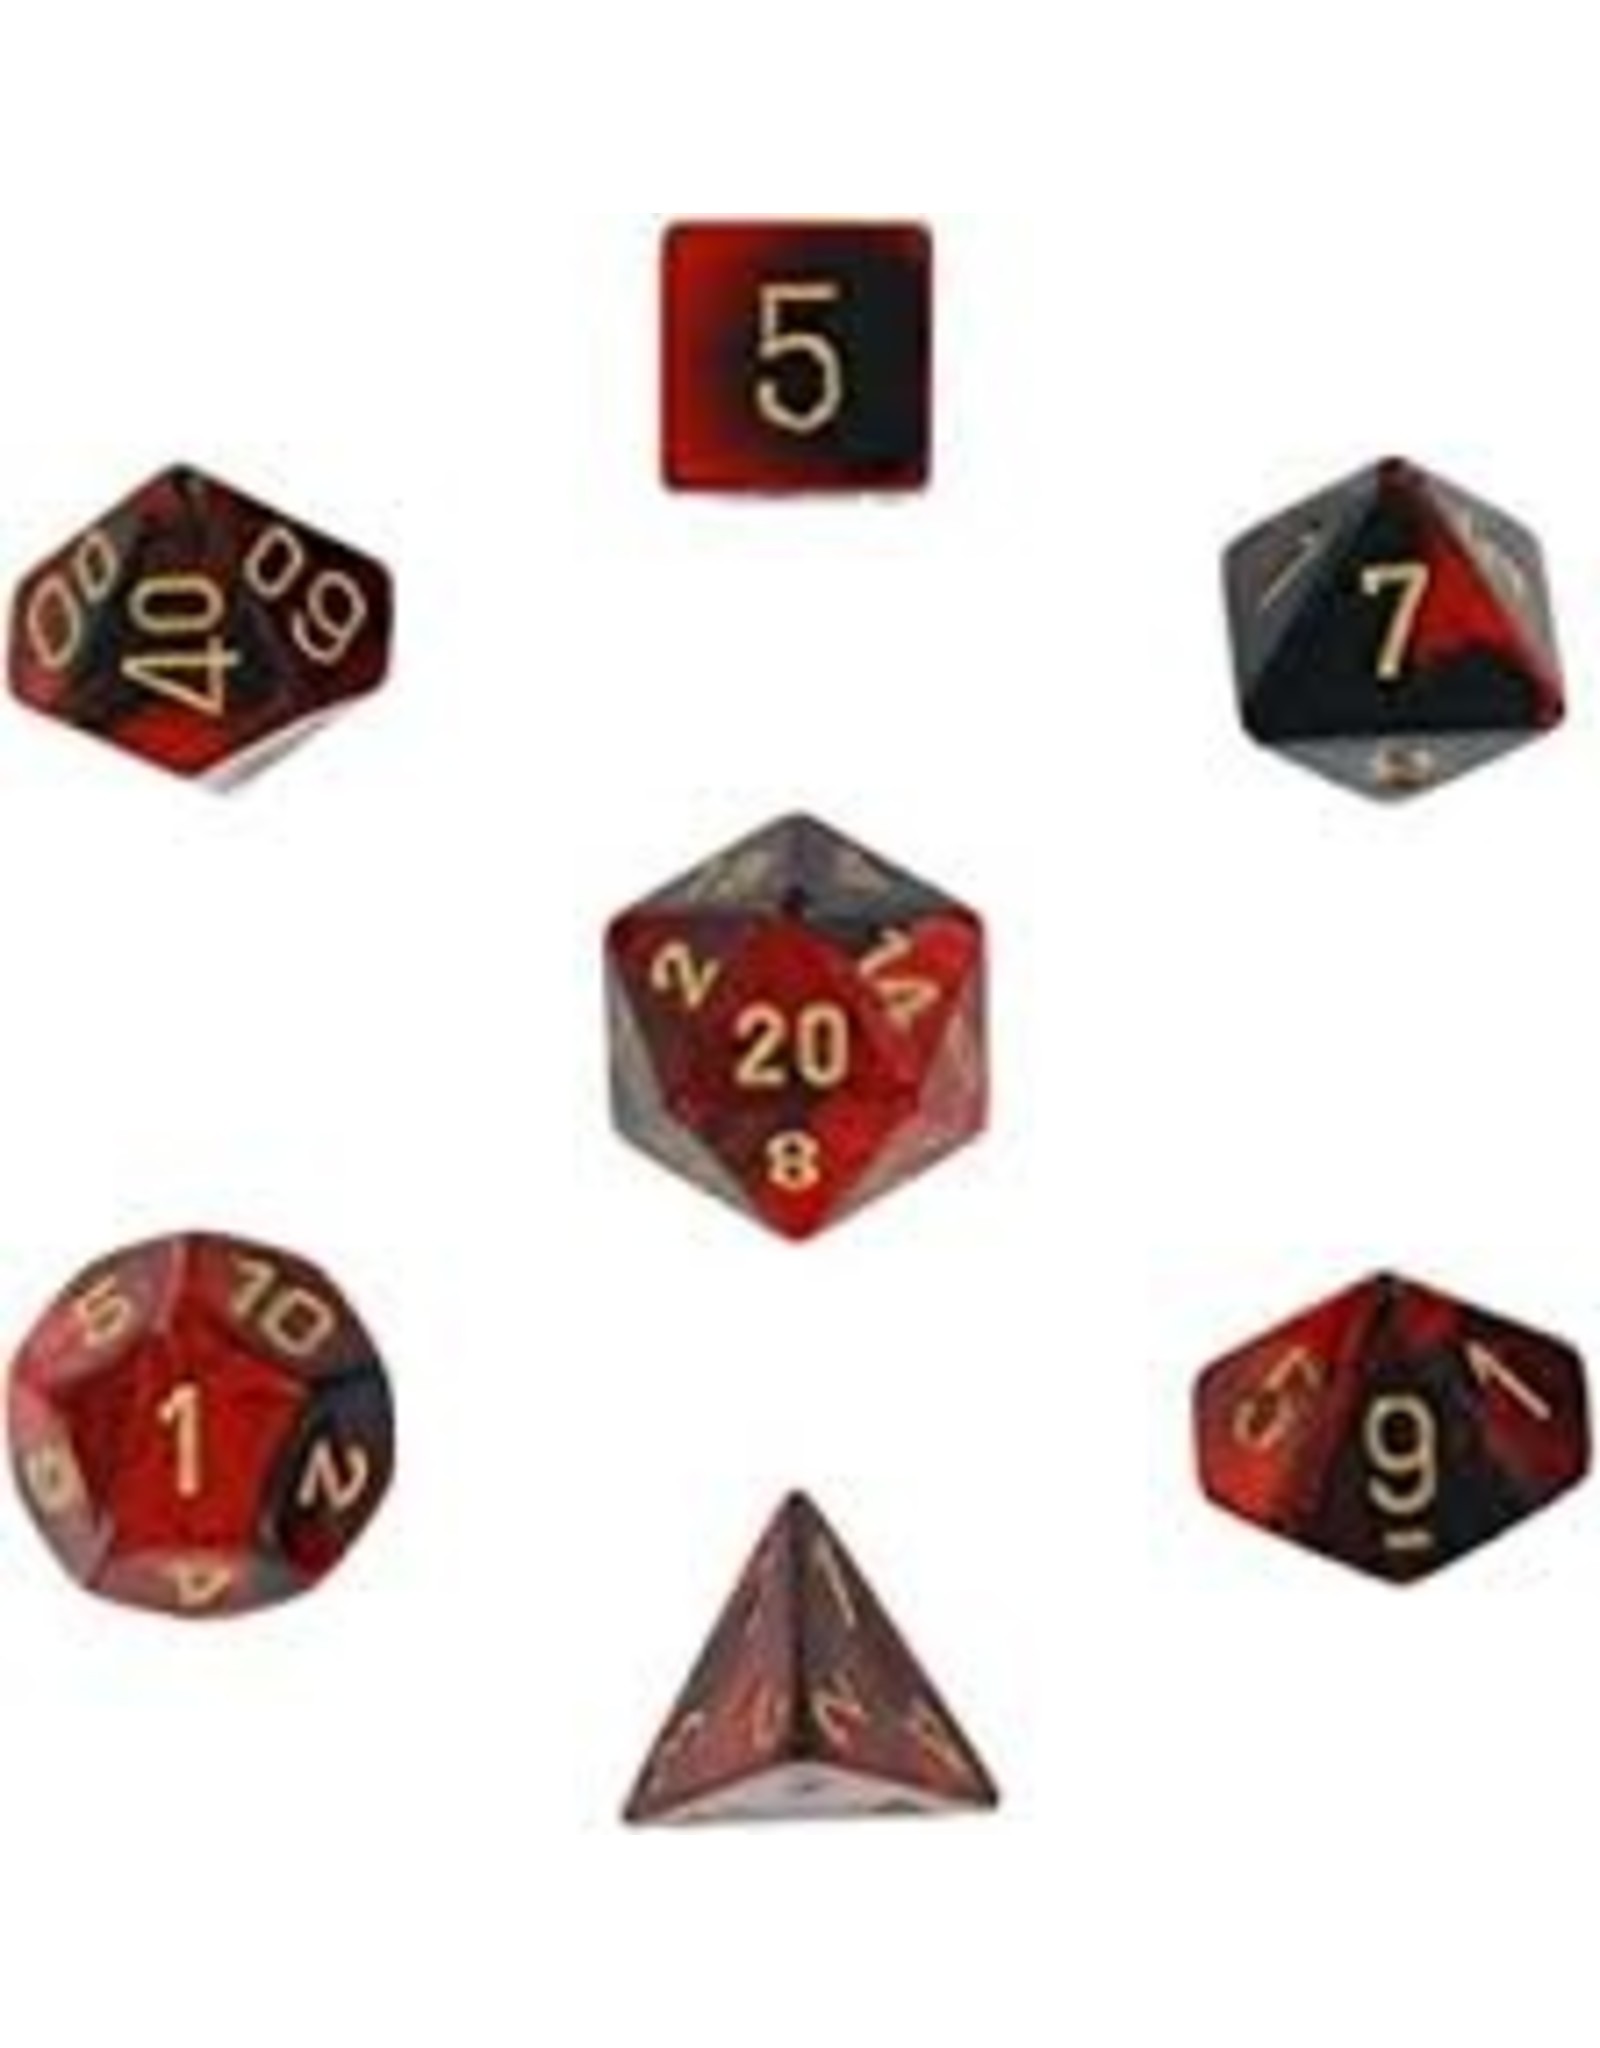 Chessex 7-Set Cube Gemini Black and Red with Gold